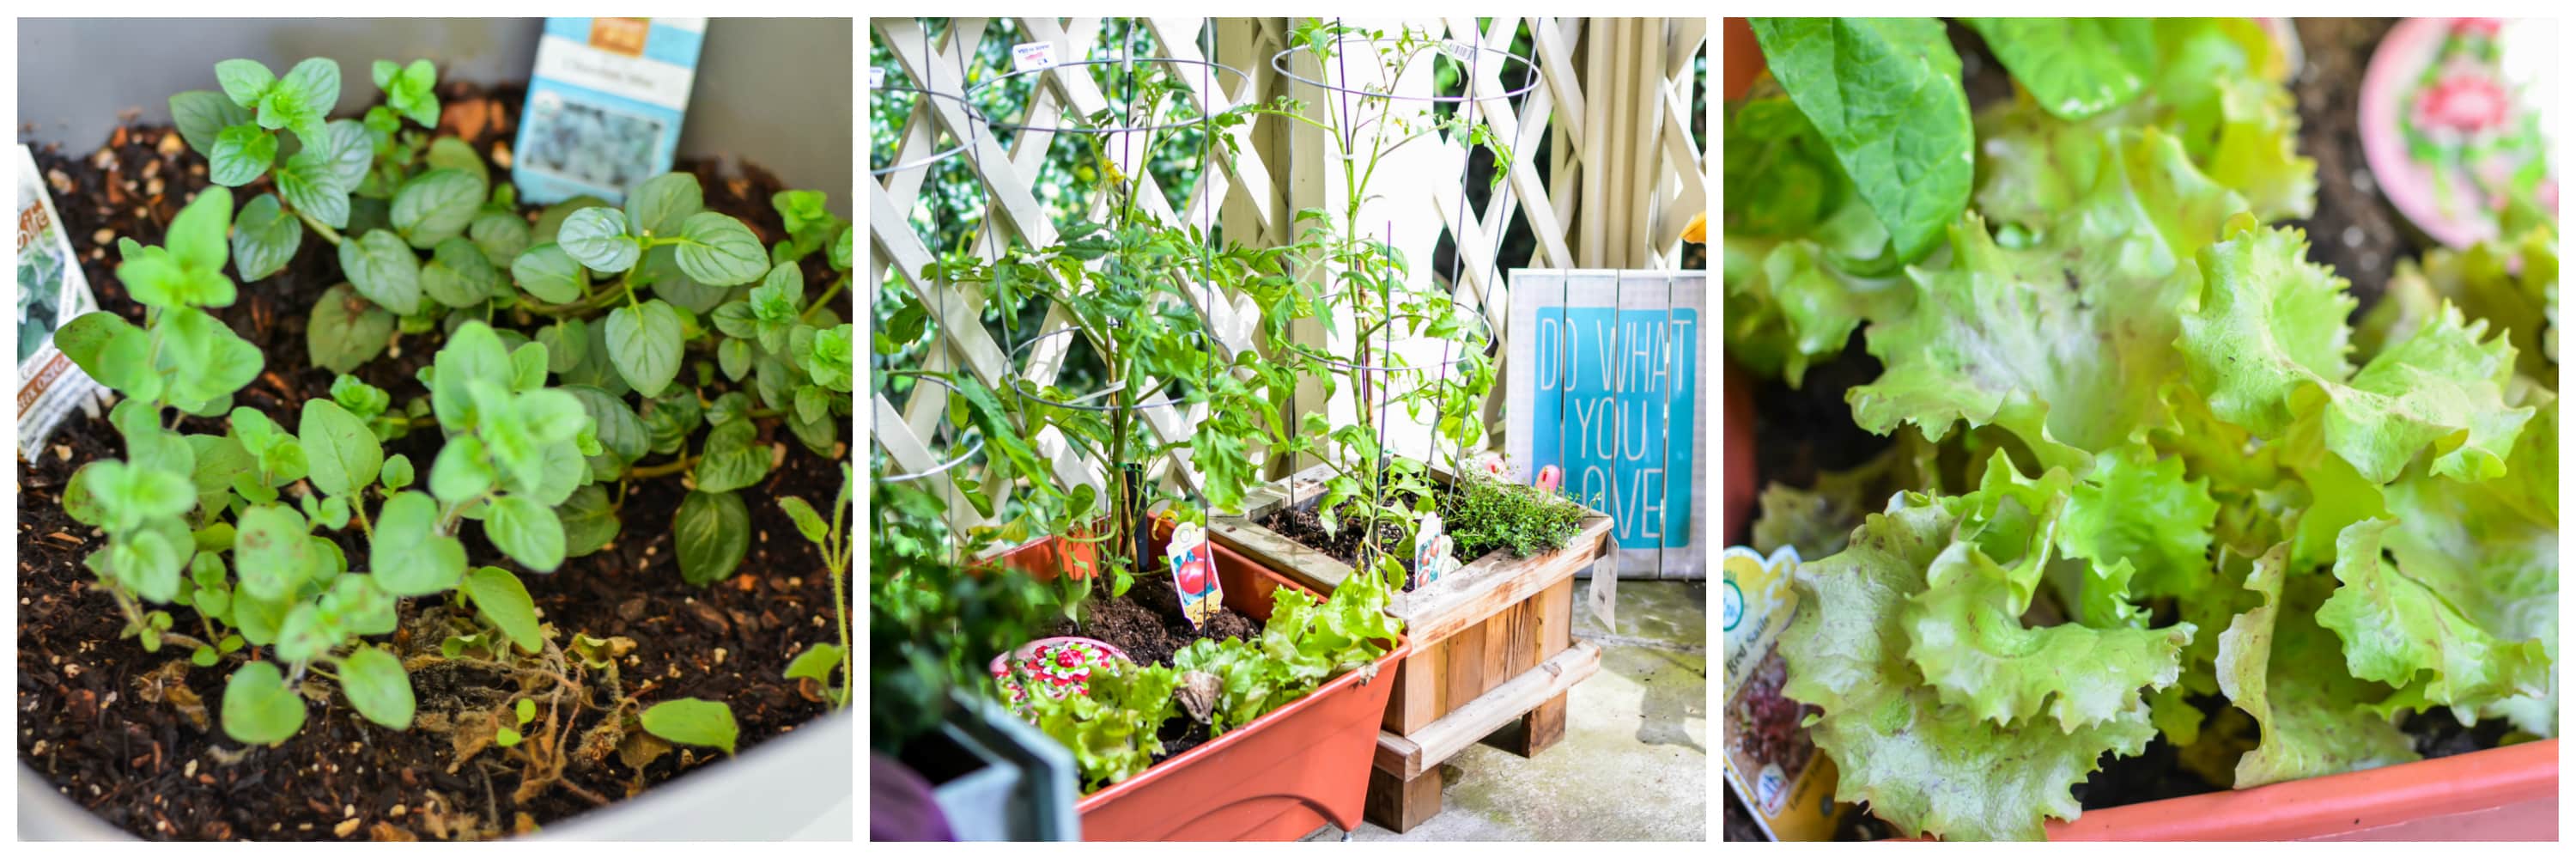 Small Patio Garden Inspiration. Grow your own fruit and vegetable garden, even if you have a small space. Container gardening is perfect for creating an outdoor haven.